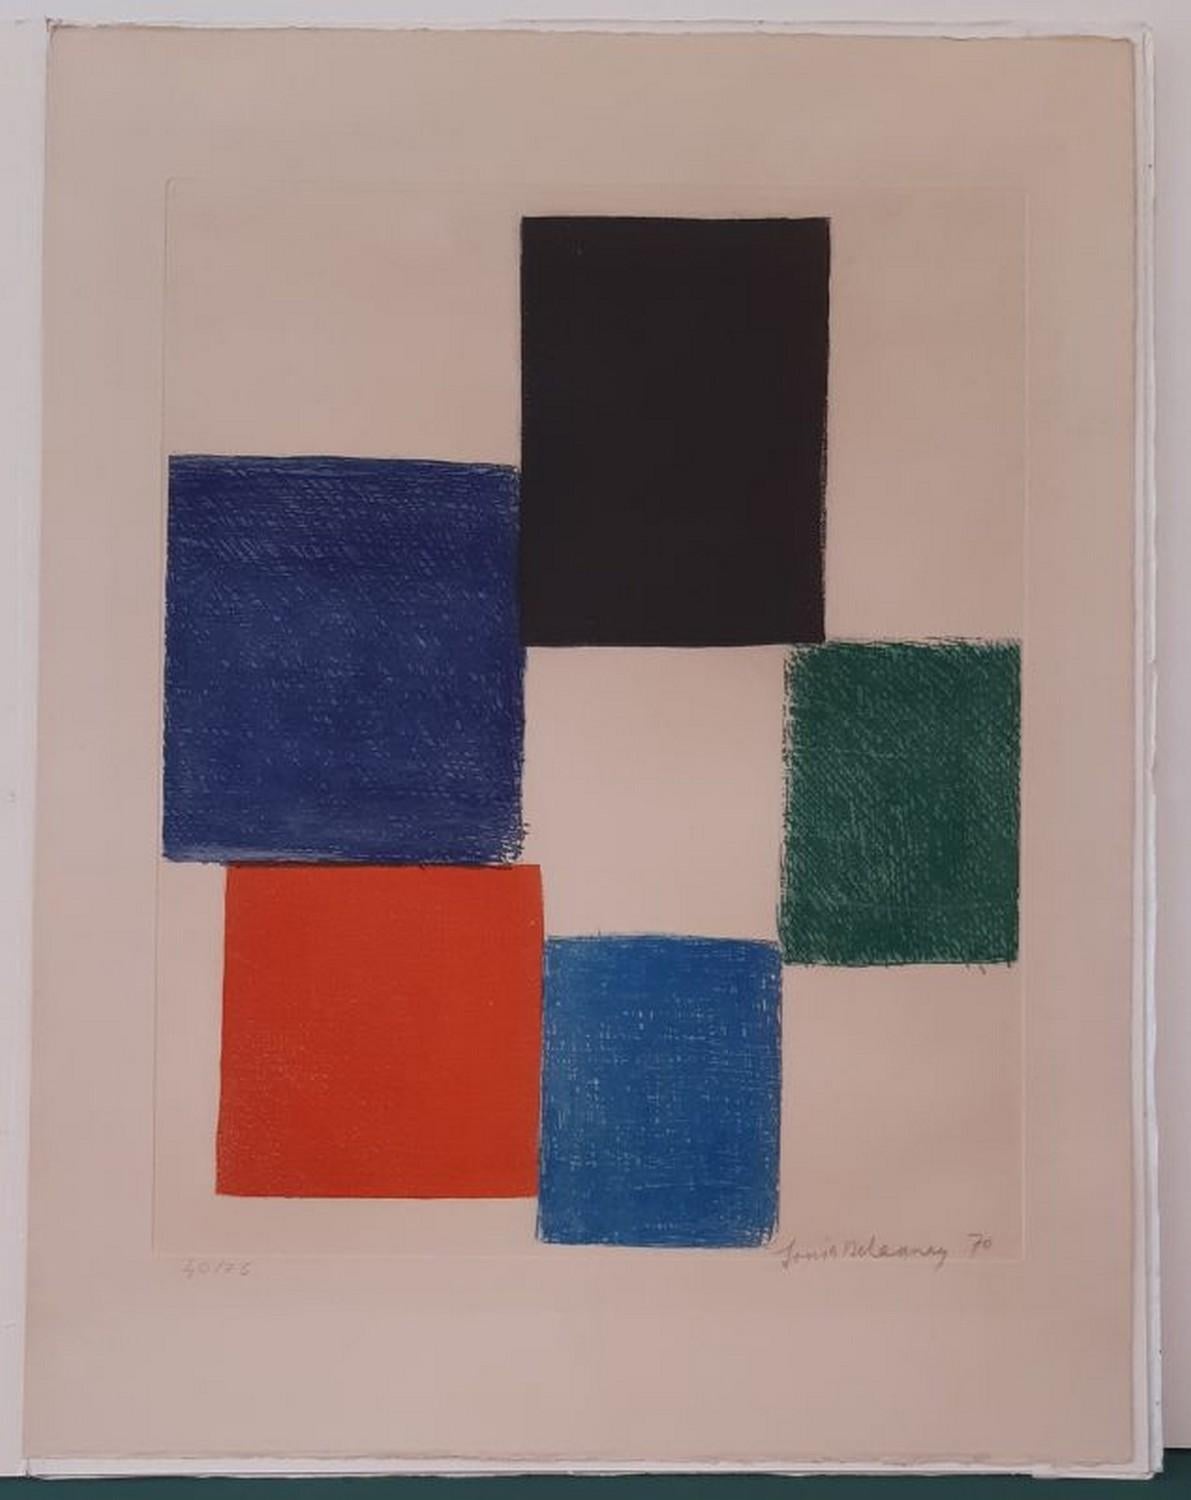 Sonia Delaunay Abstract Print - Avec moi-même 